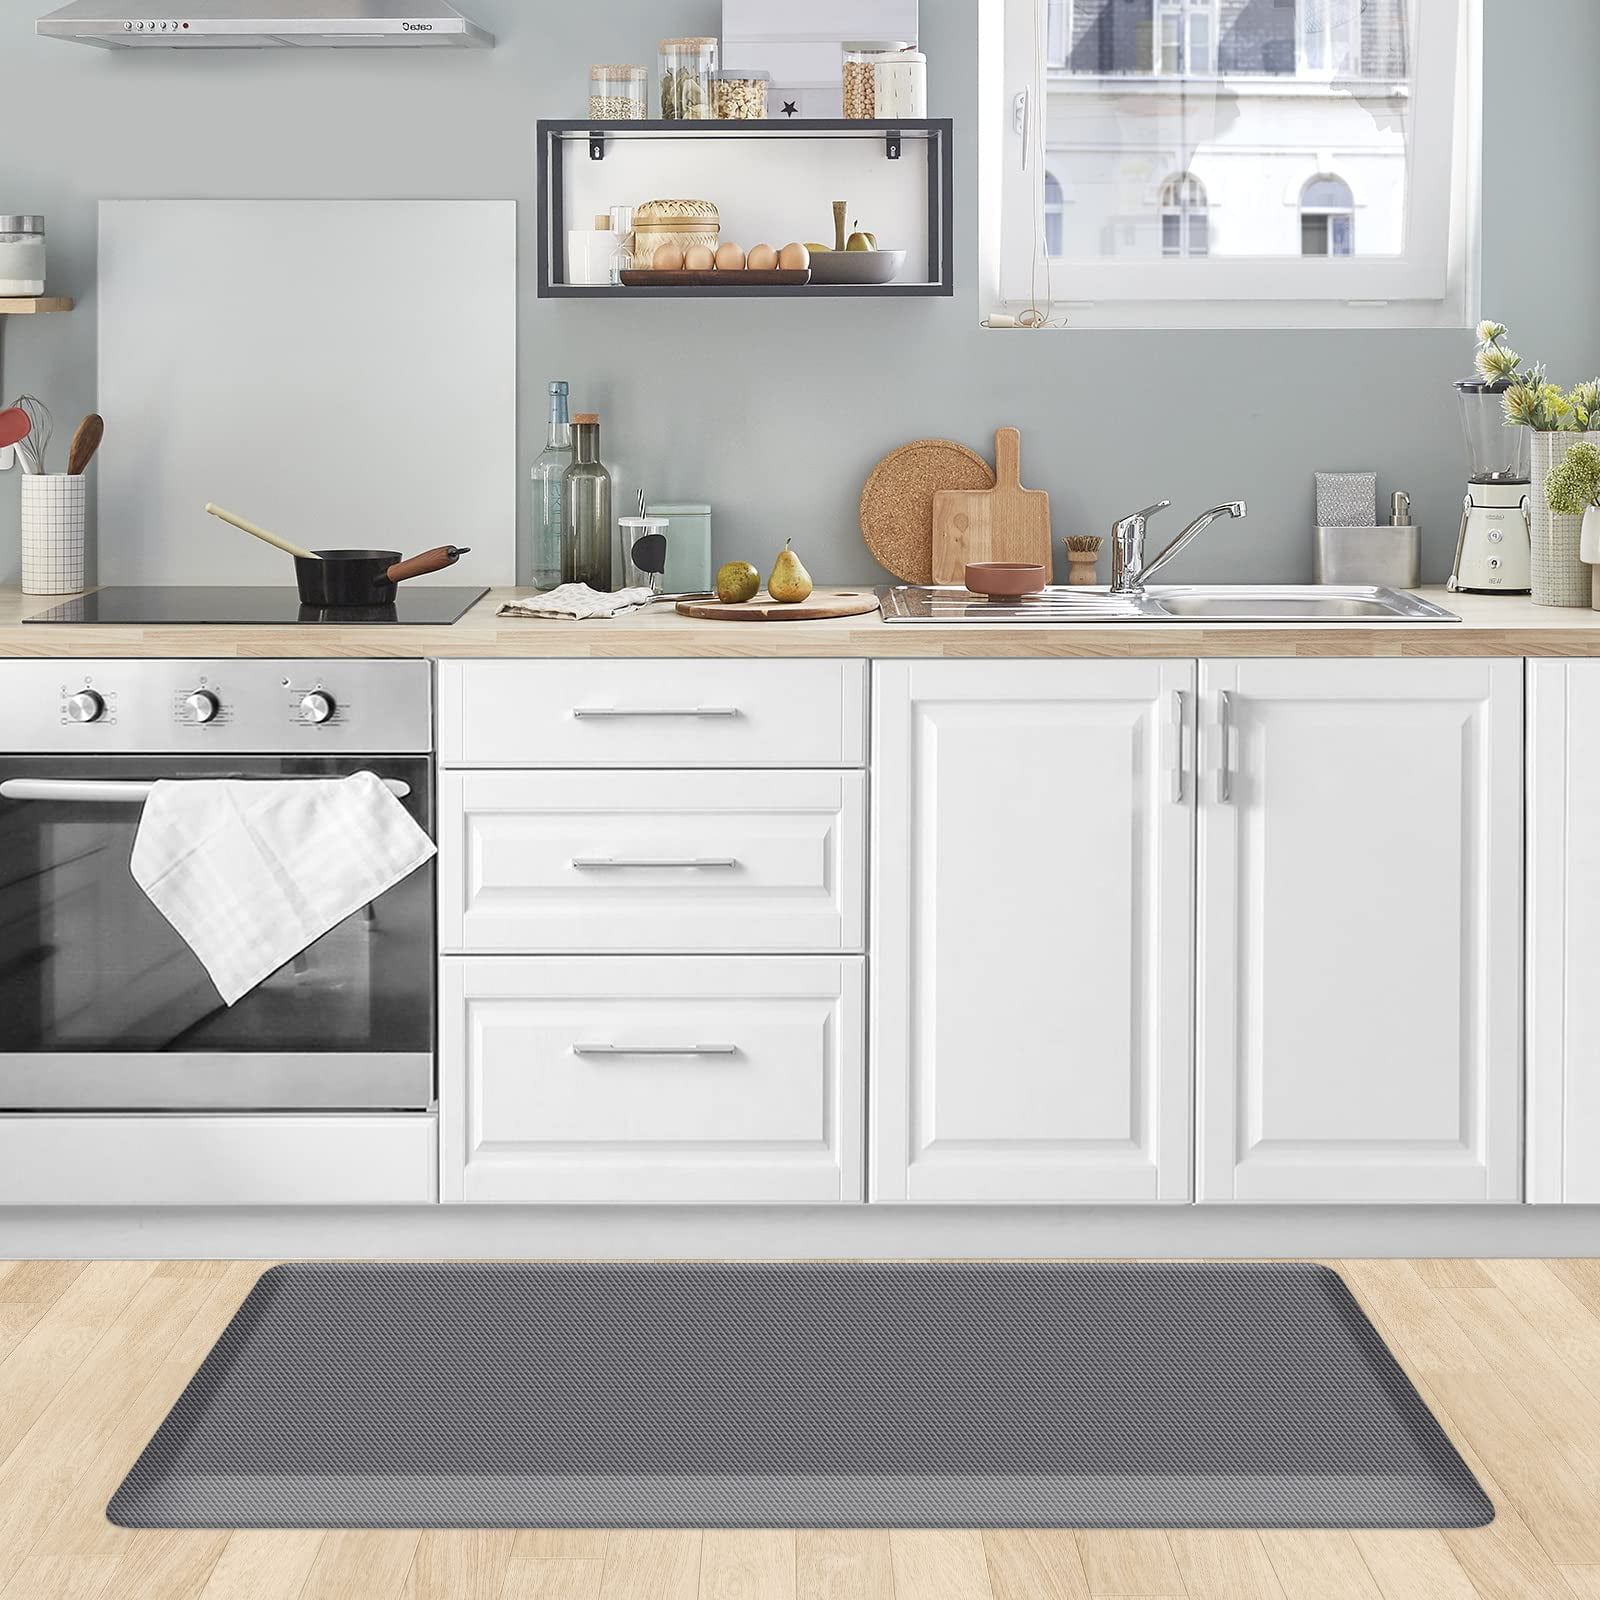 QSY Home Kitchen Anti Fatigue Rugs 20x39x1/2-Inch Floor Comfort